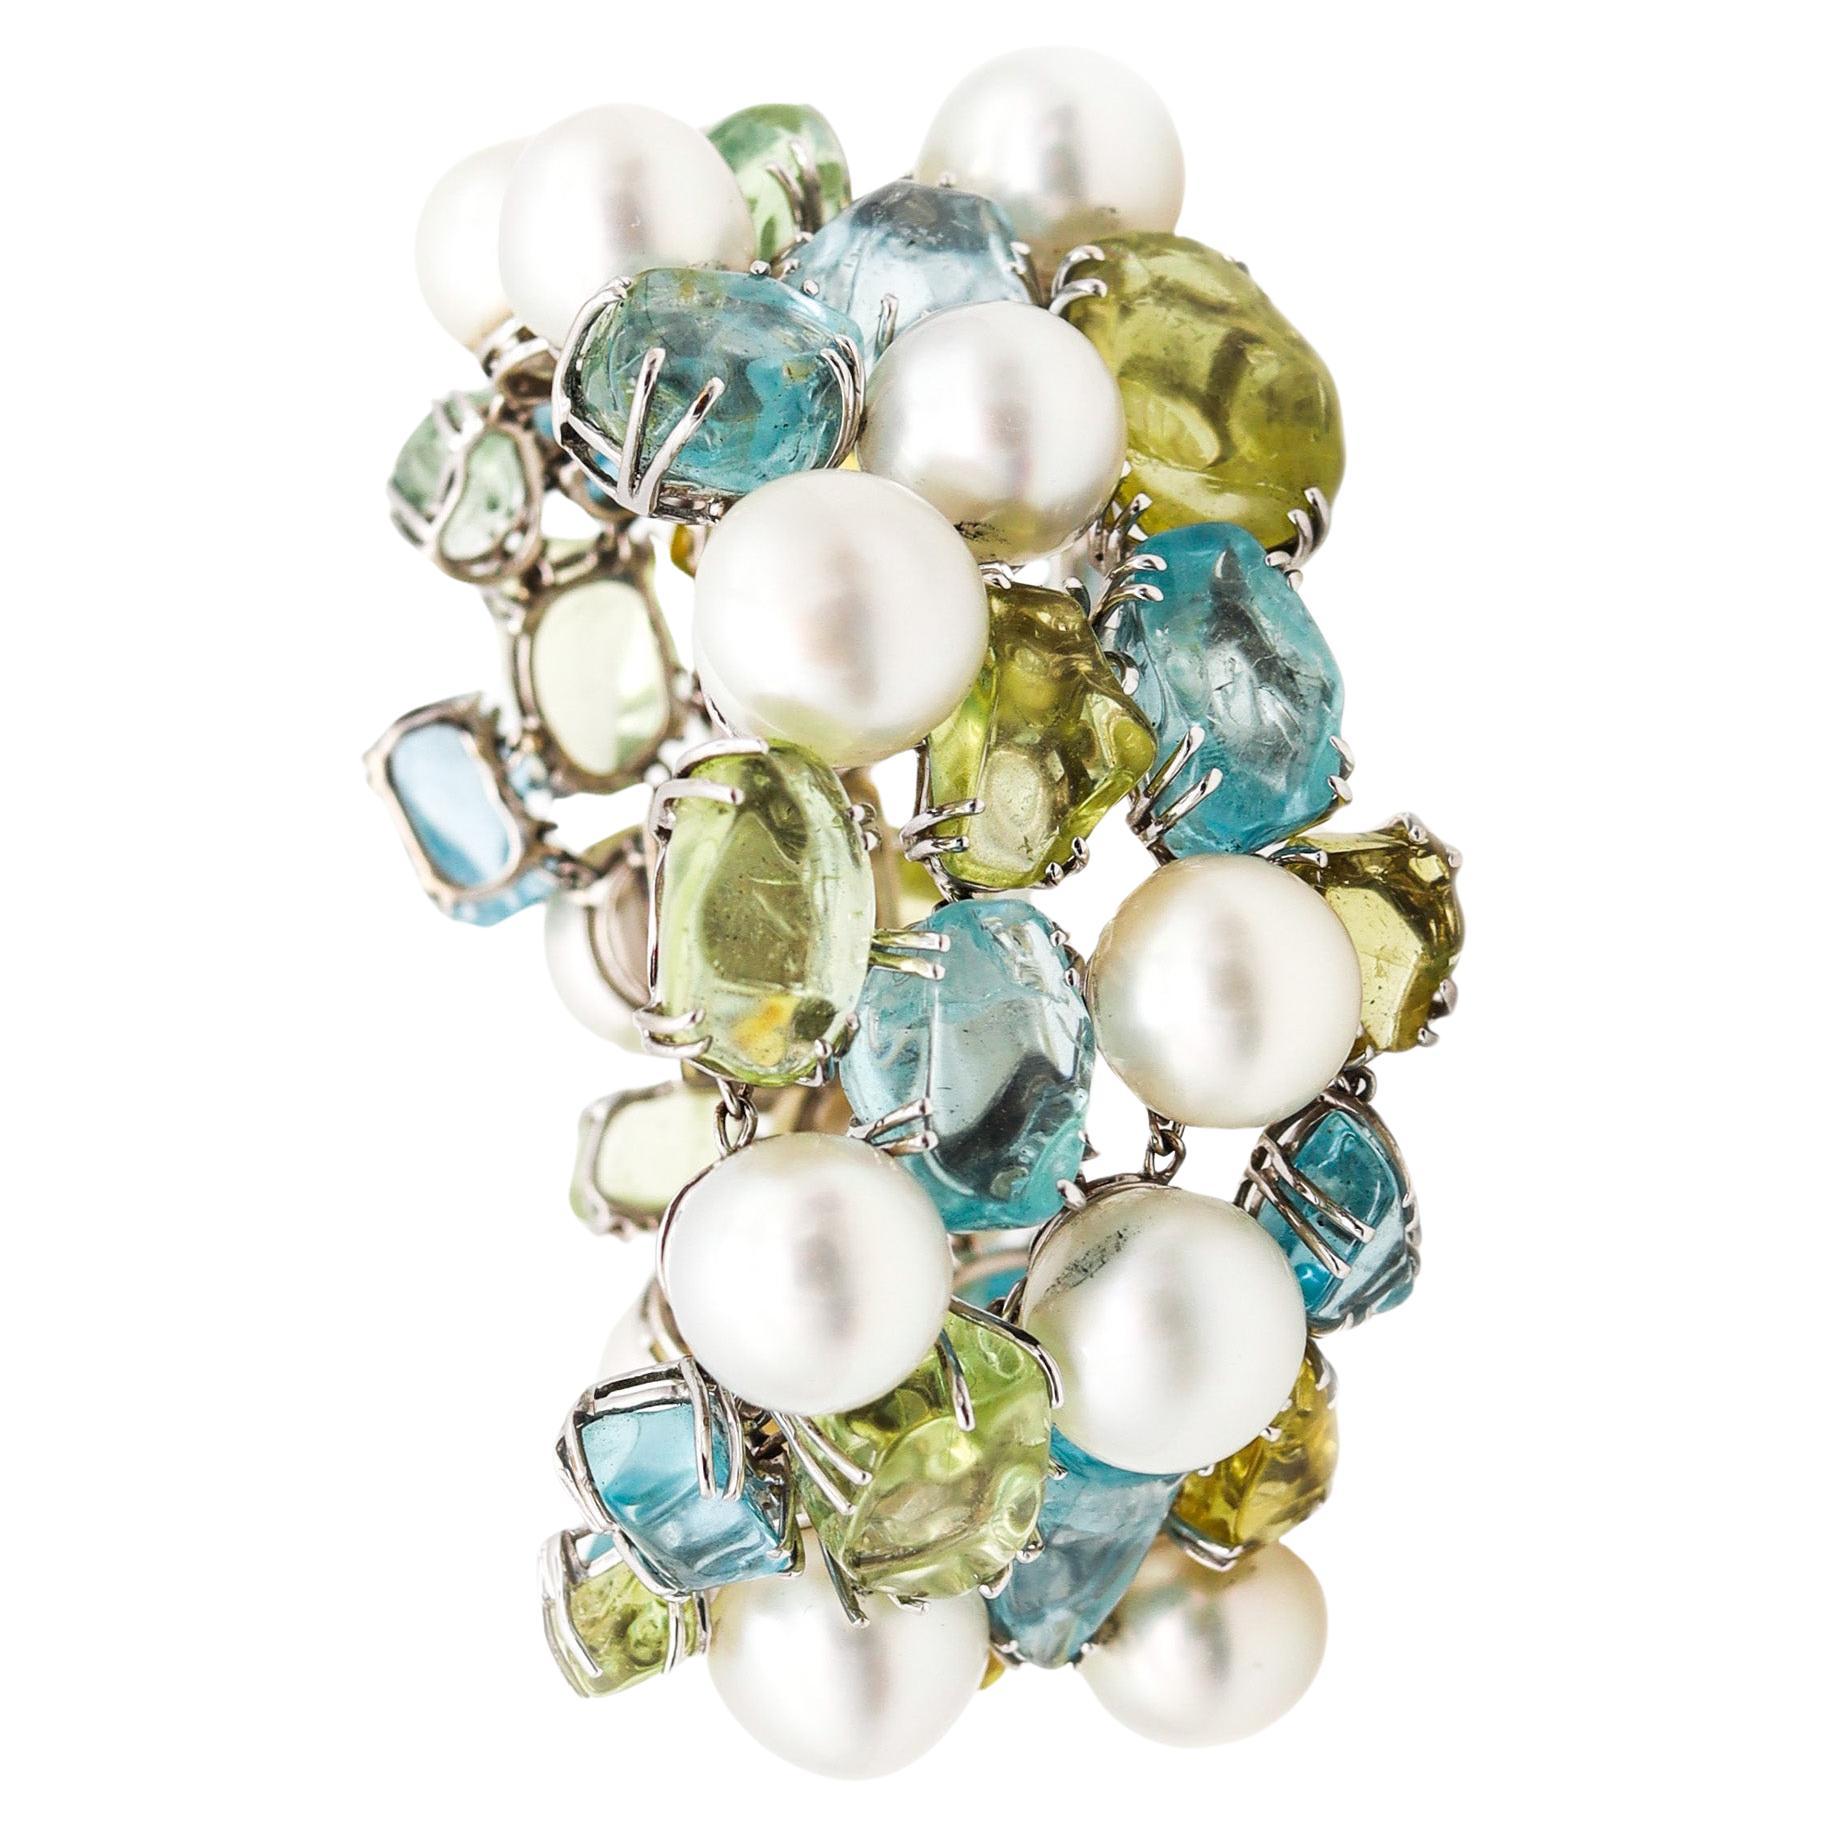 Salavetti Pearls Bracelet In 18Kt White Gold With 108 Ctw Aquamarines And Beryl For Sale